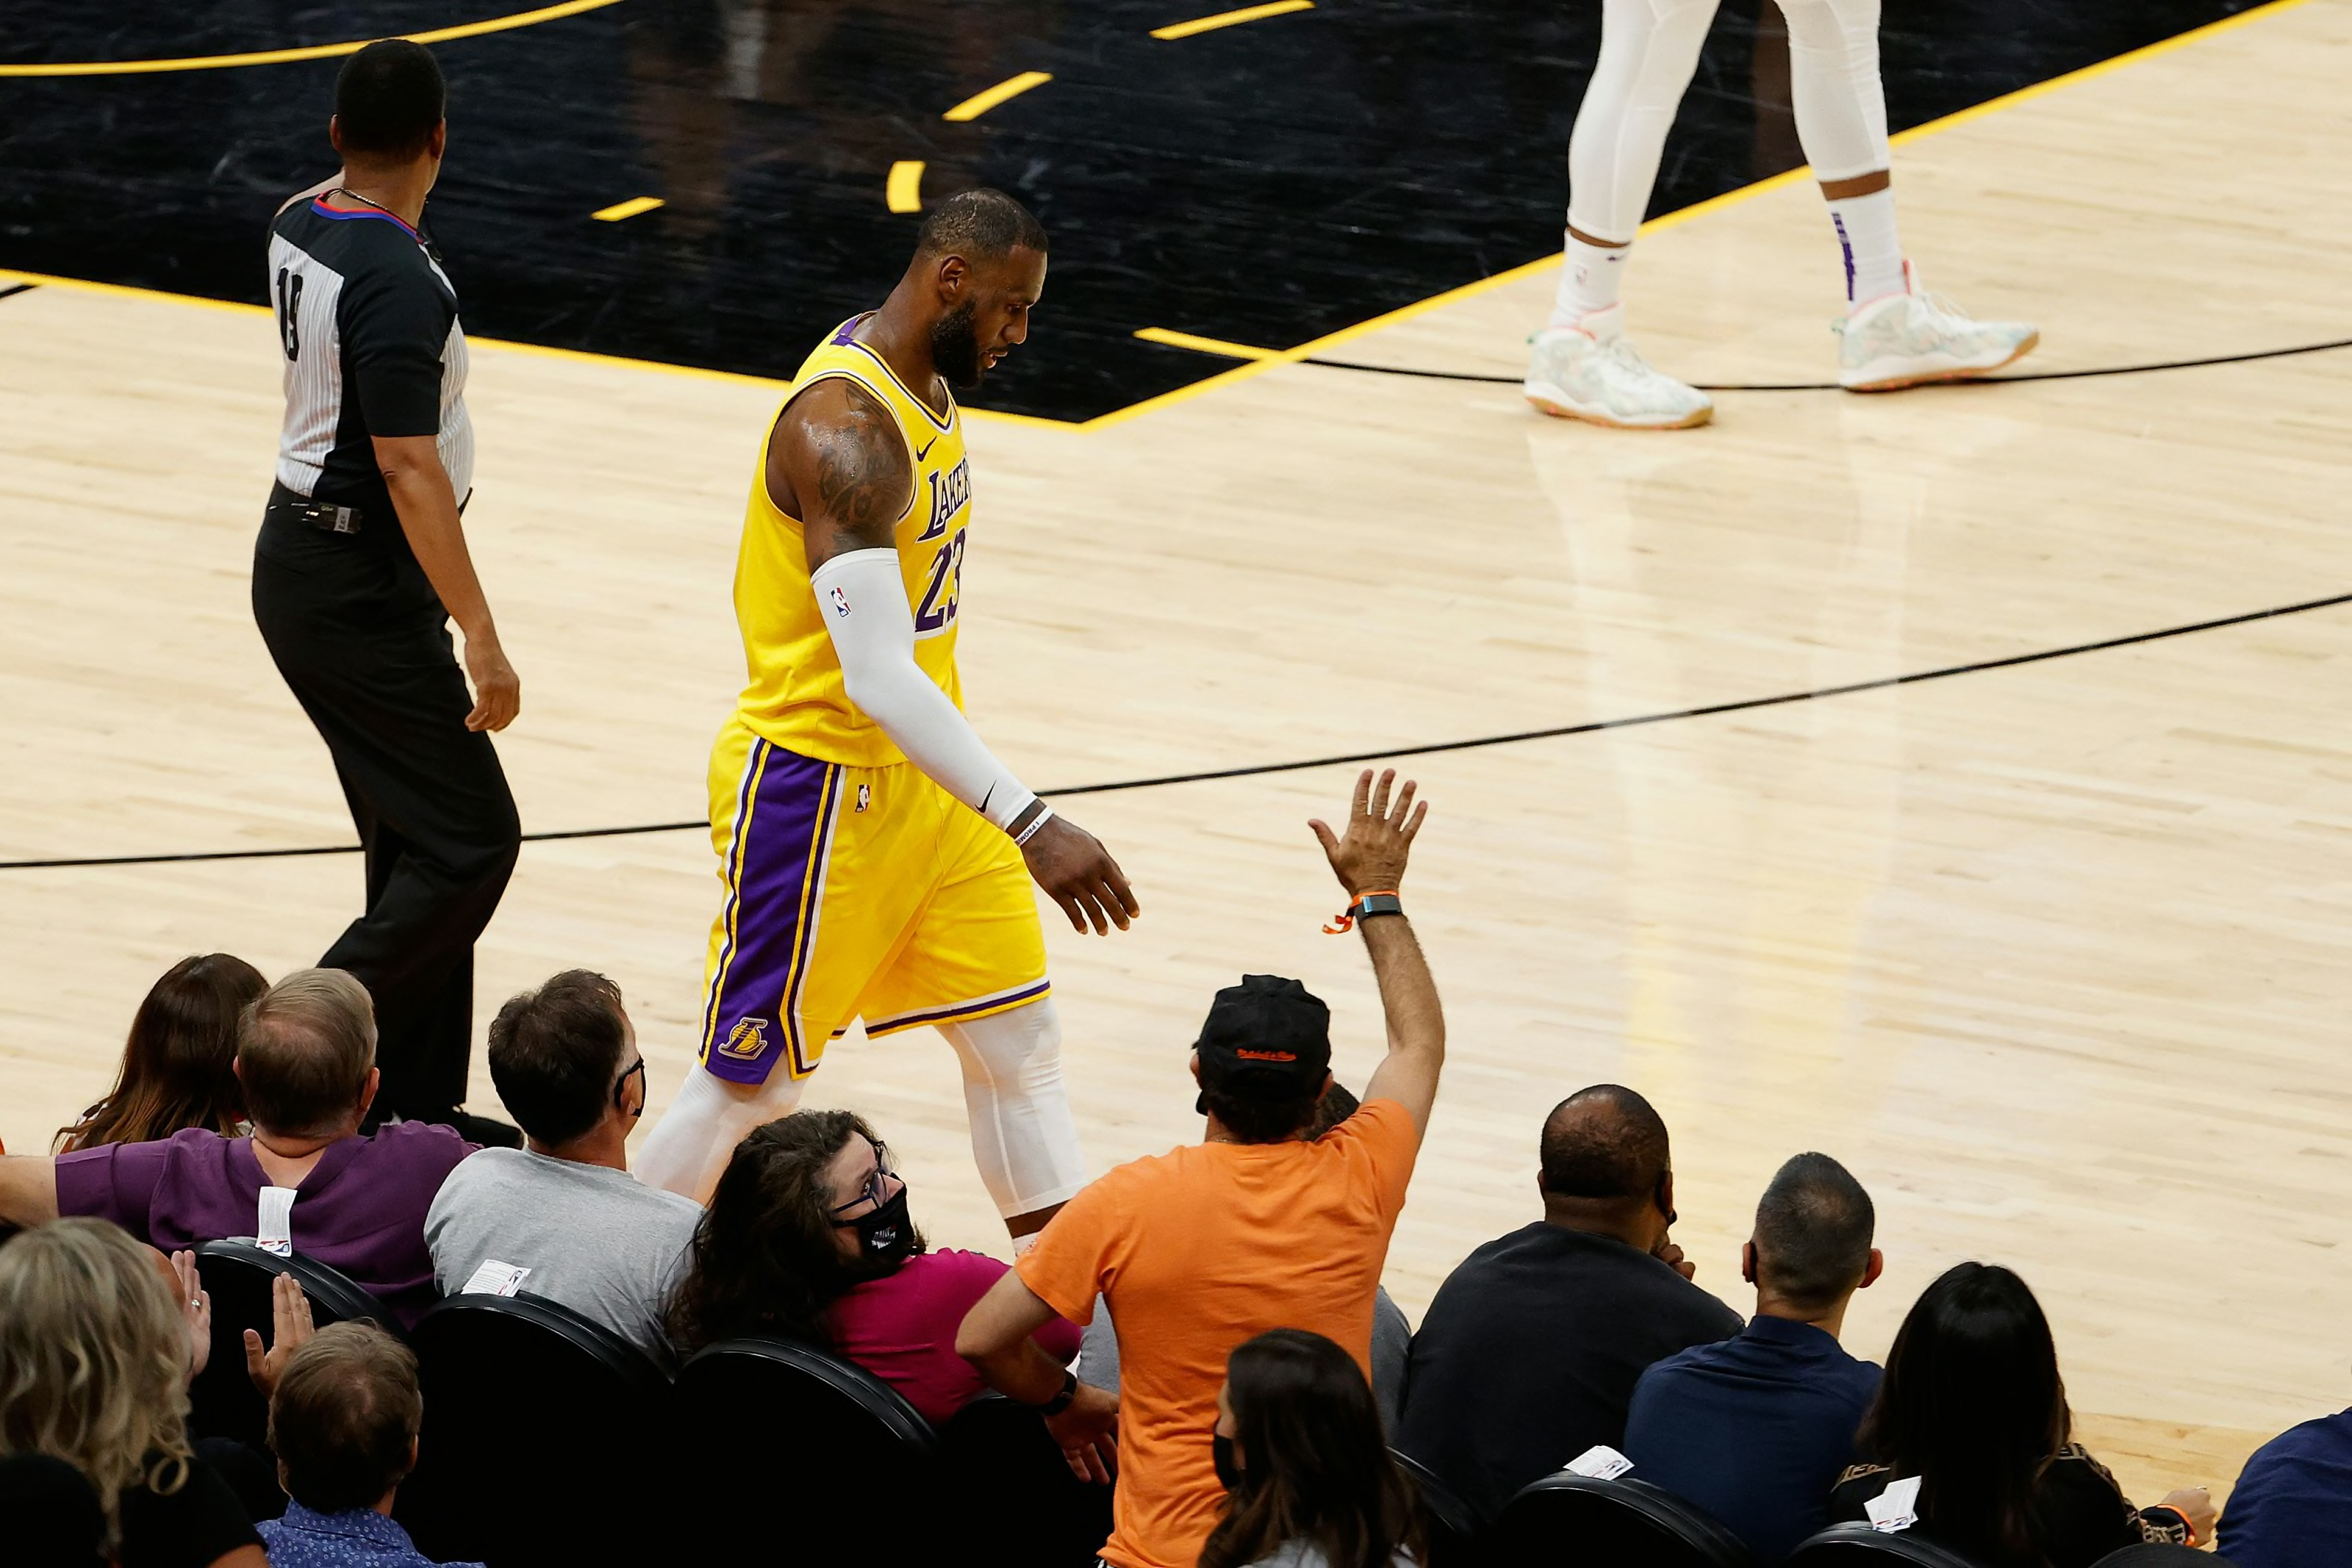 Los Angeles Lakers' LeBron James ready for 21st NBA season, eager to chase  18th title - Times of India